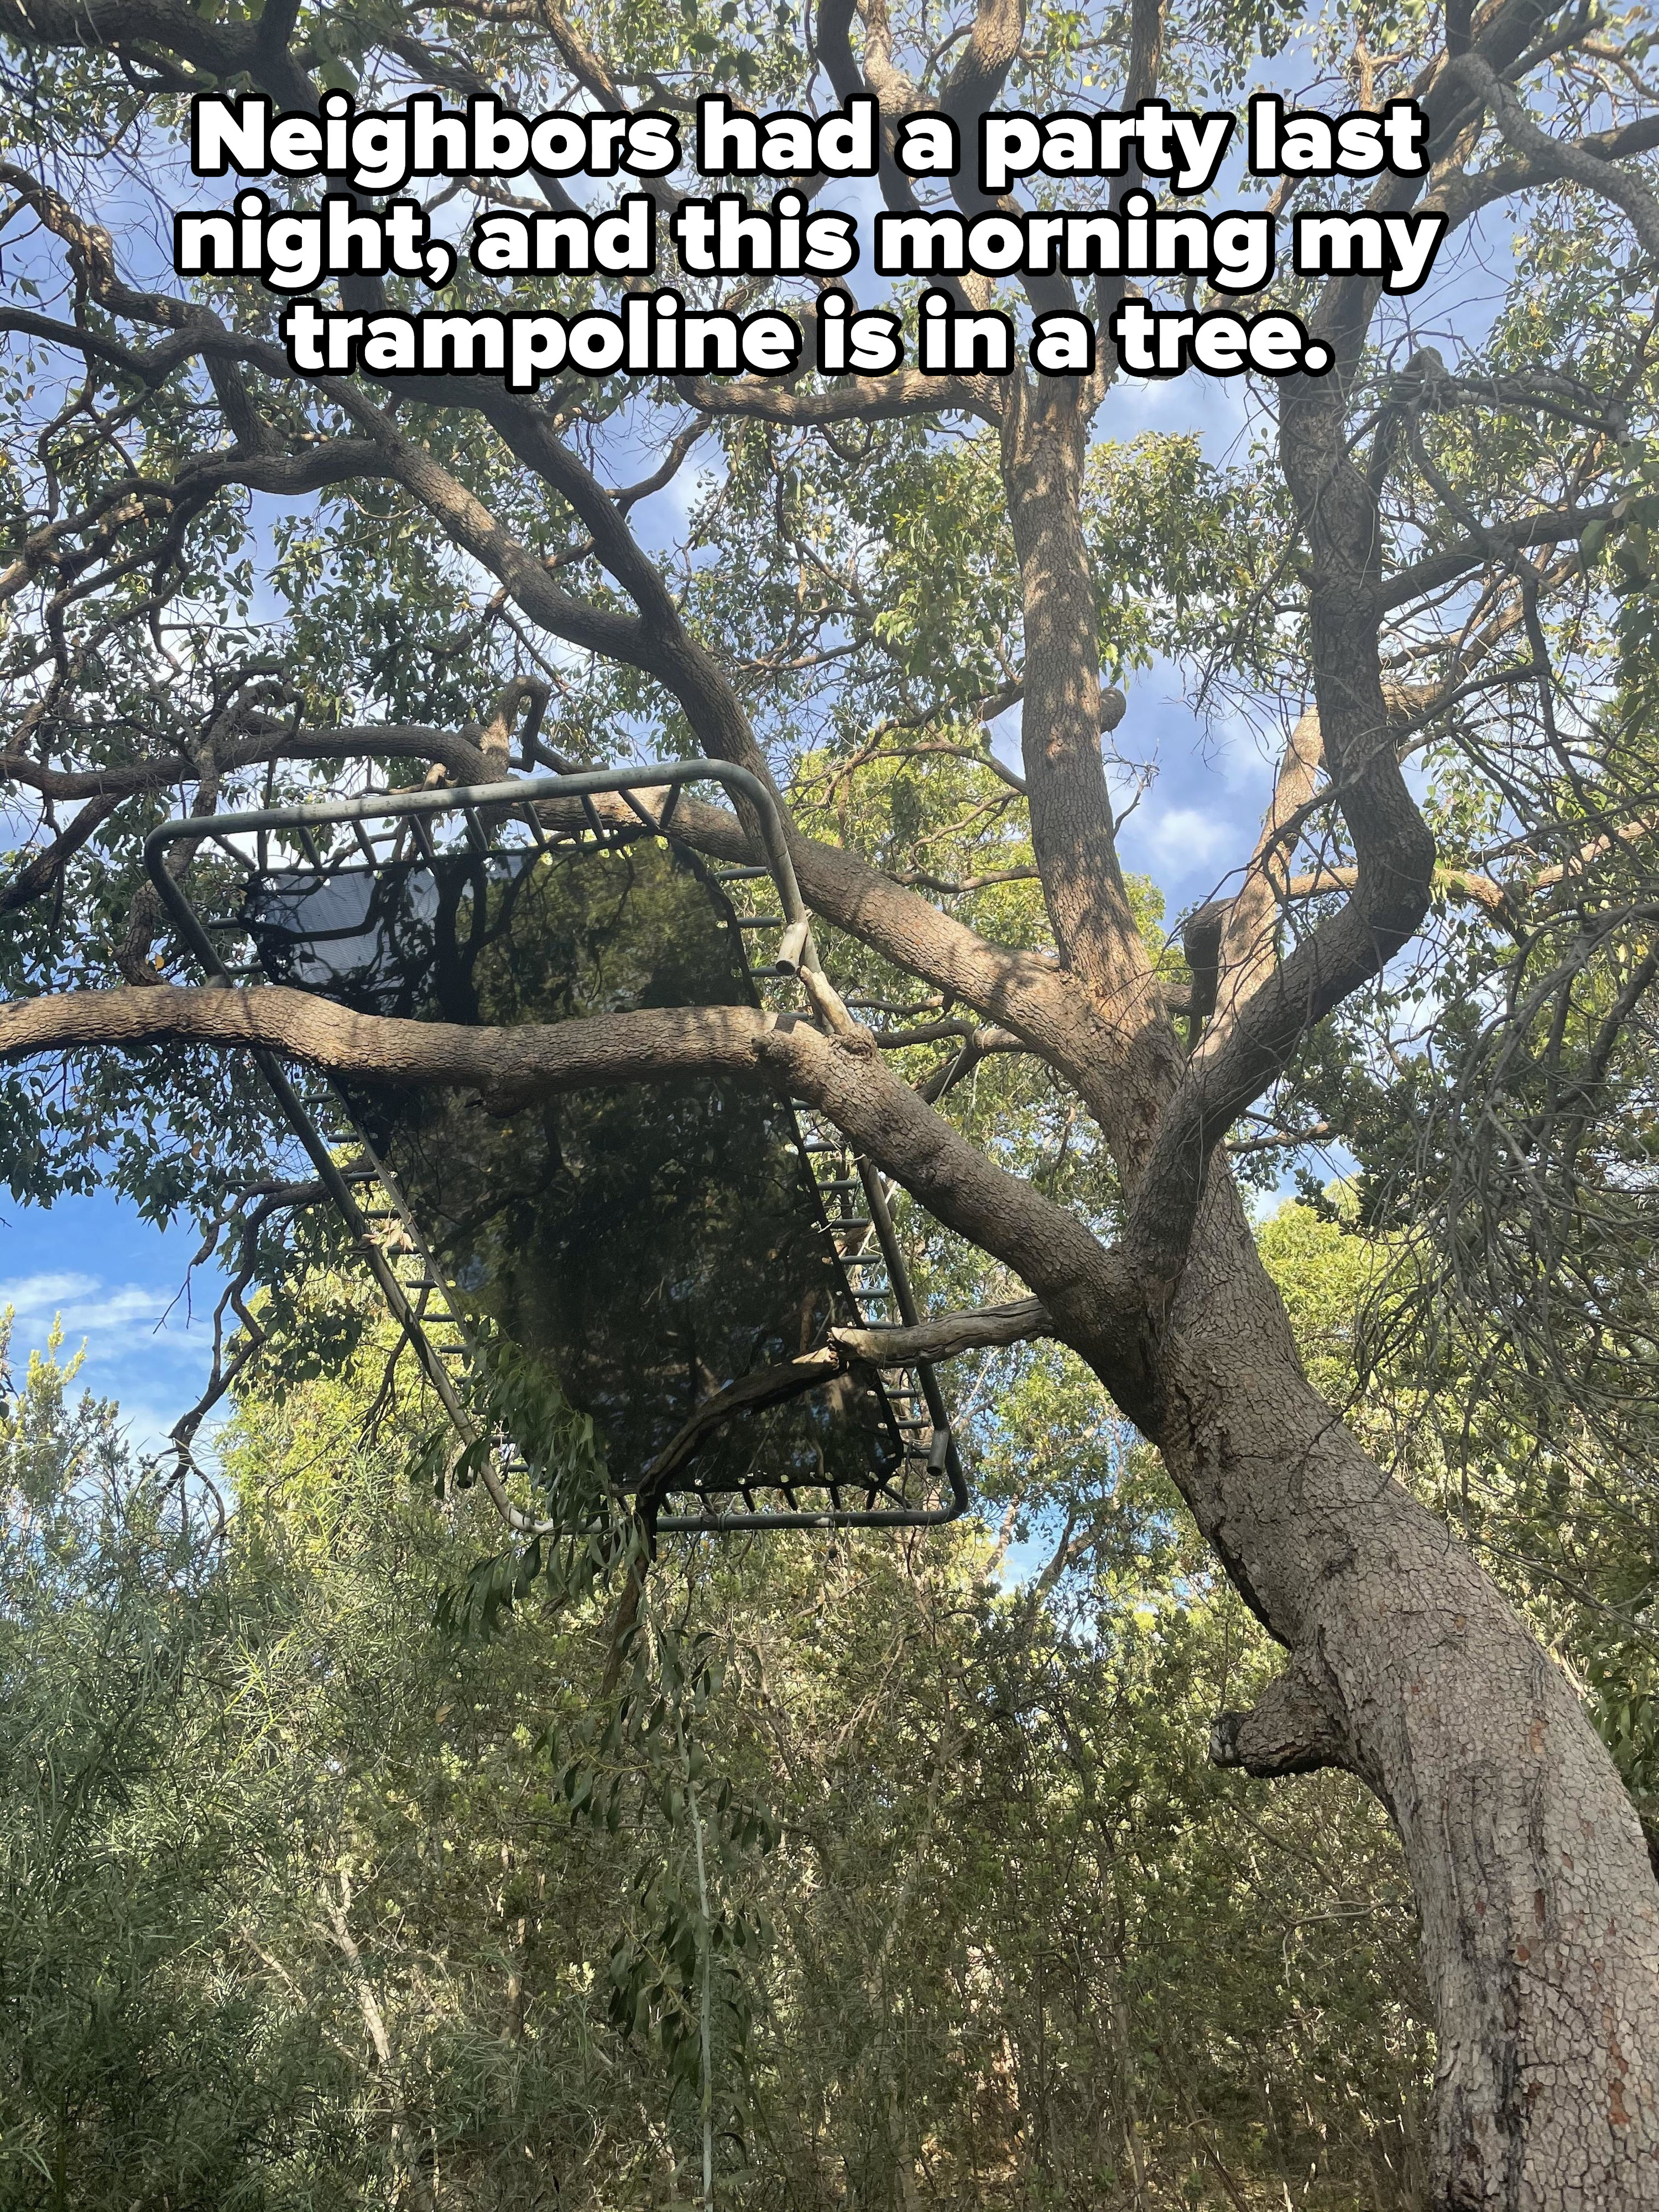 Trampoline in a tree: &quot;Neighbors had a party last night, and this morning my trampoline is in a tree&quot;